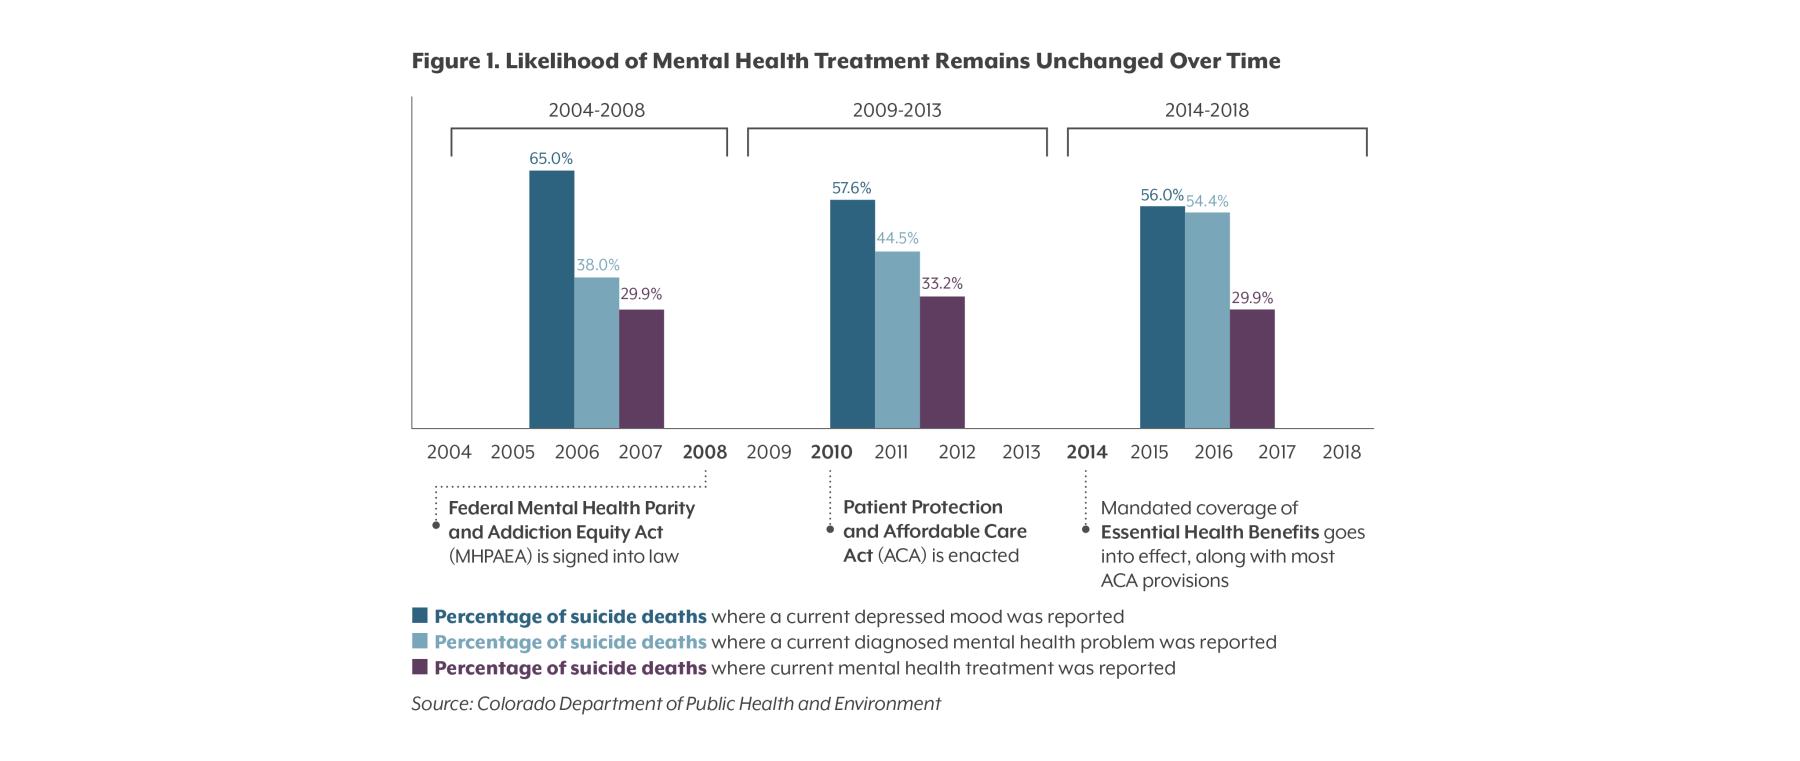 Mental Health in Teens Report: Suicidality, Sexual Violence Hit Record Highs